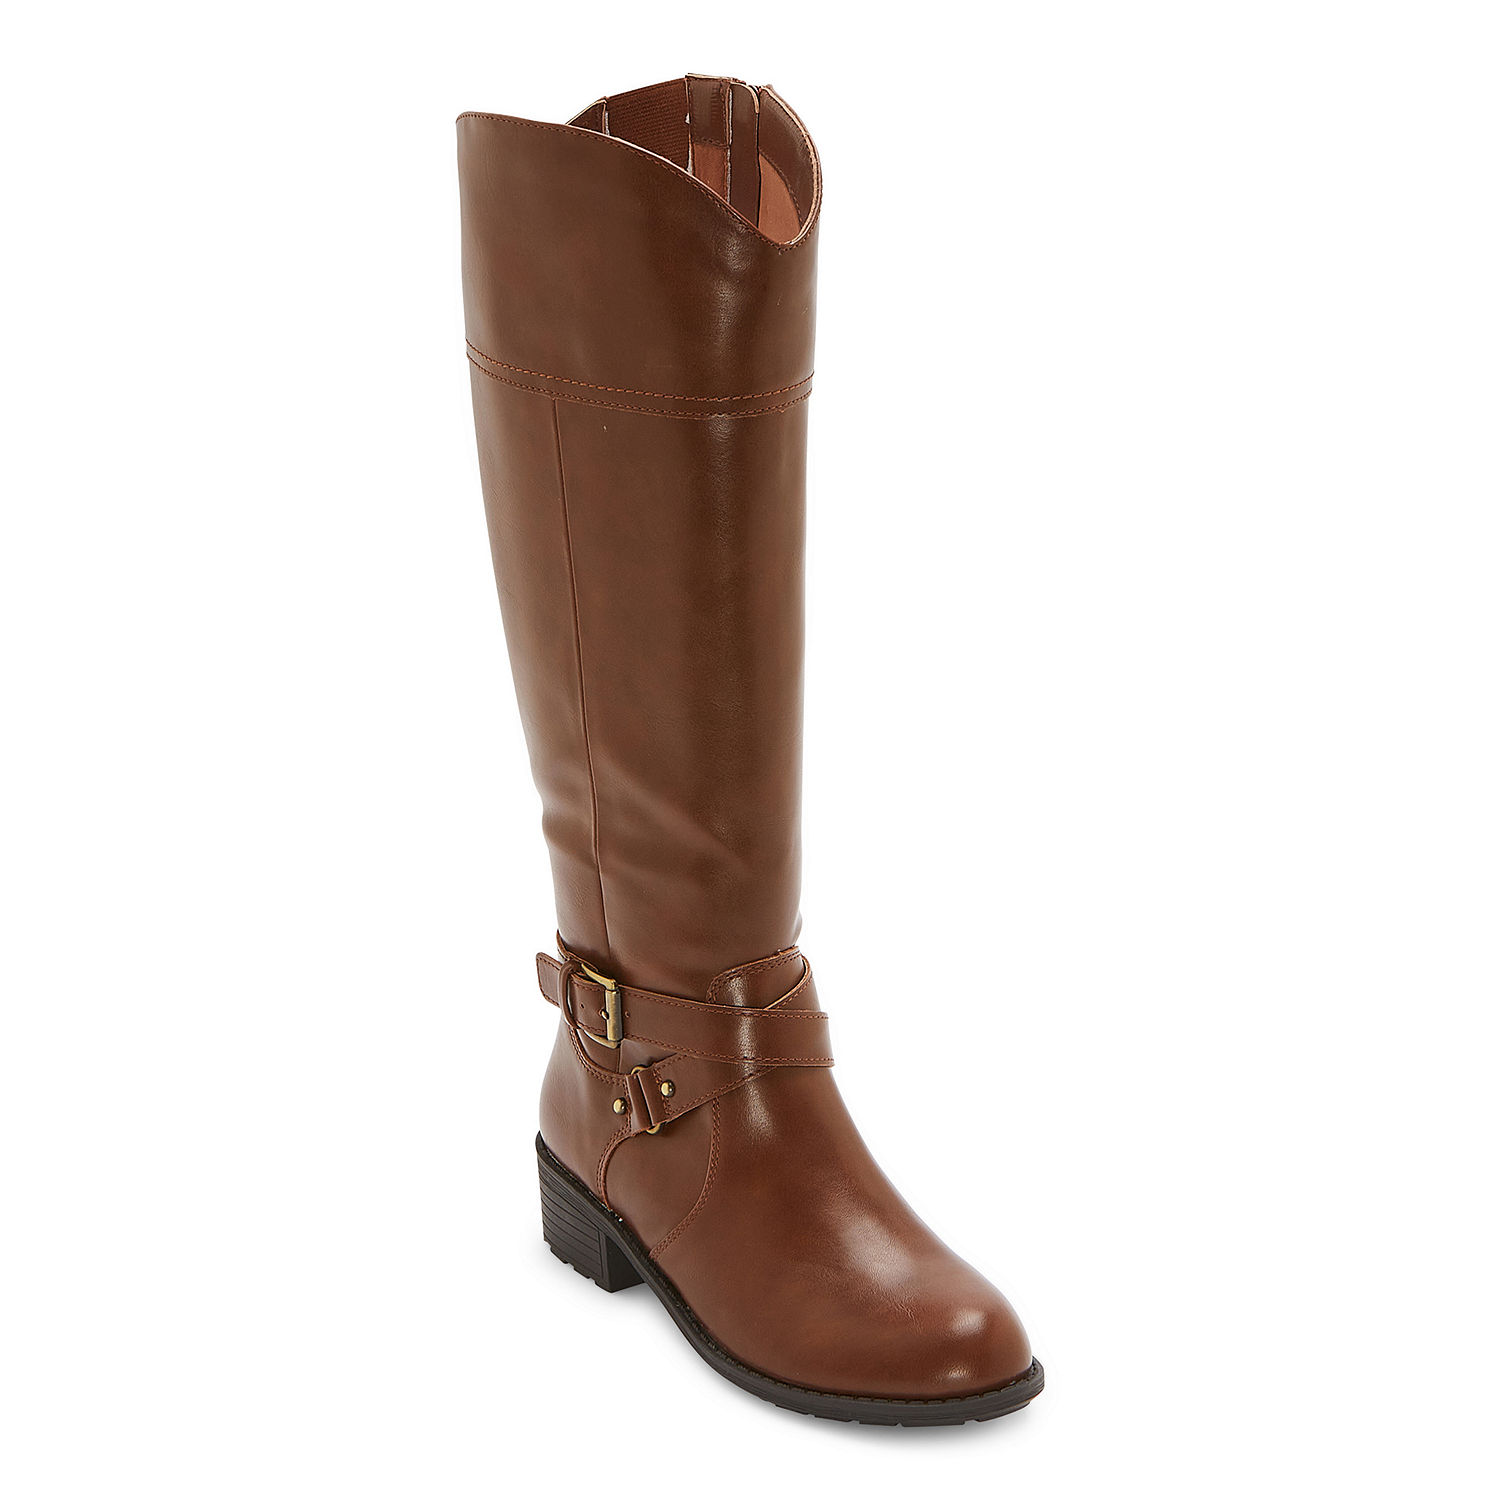 St. John's Bay Womens Dempsy Stacked Heel Riding Boots - JCPenney